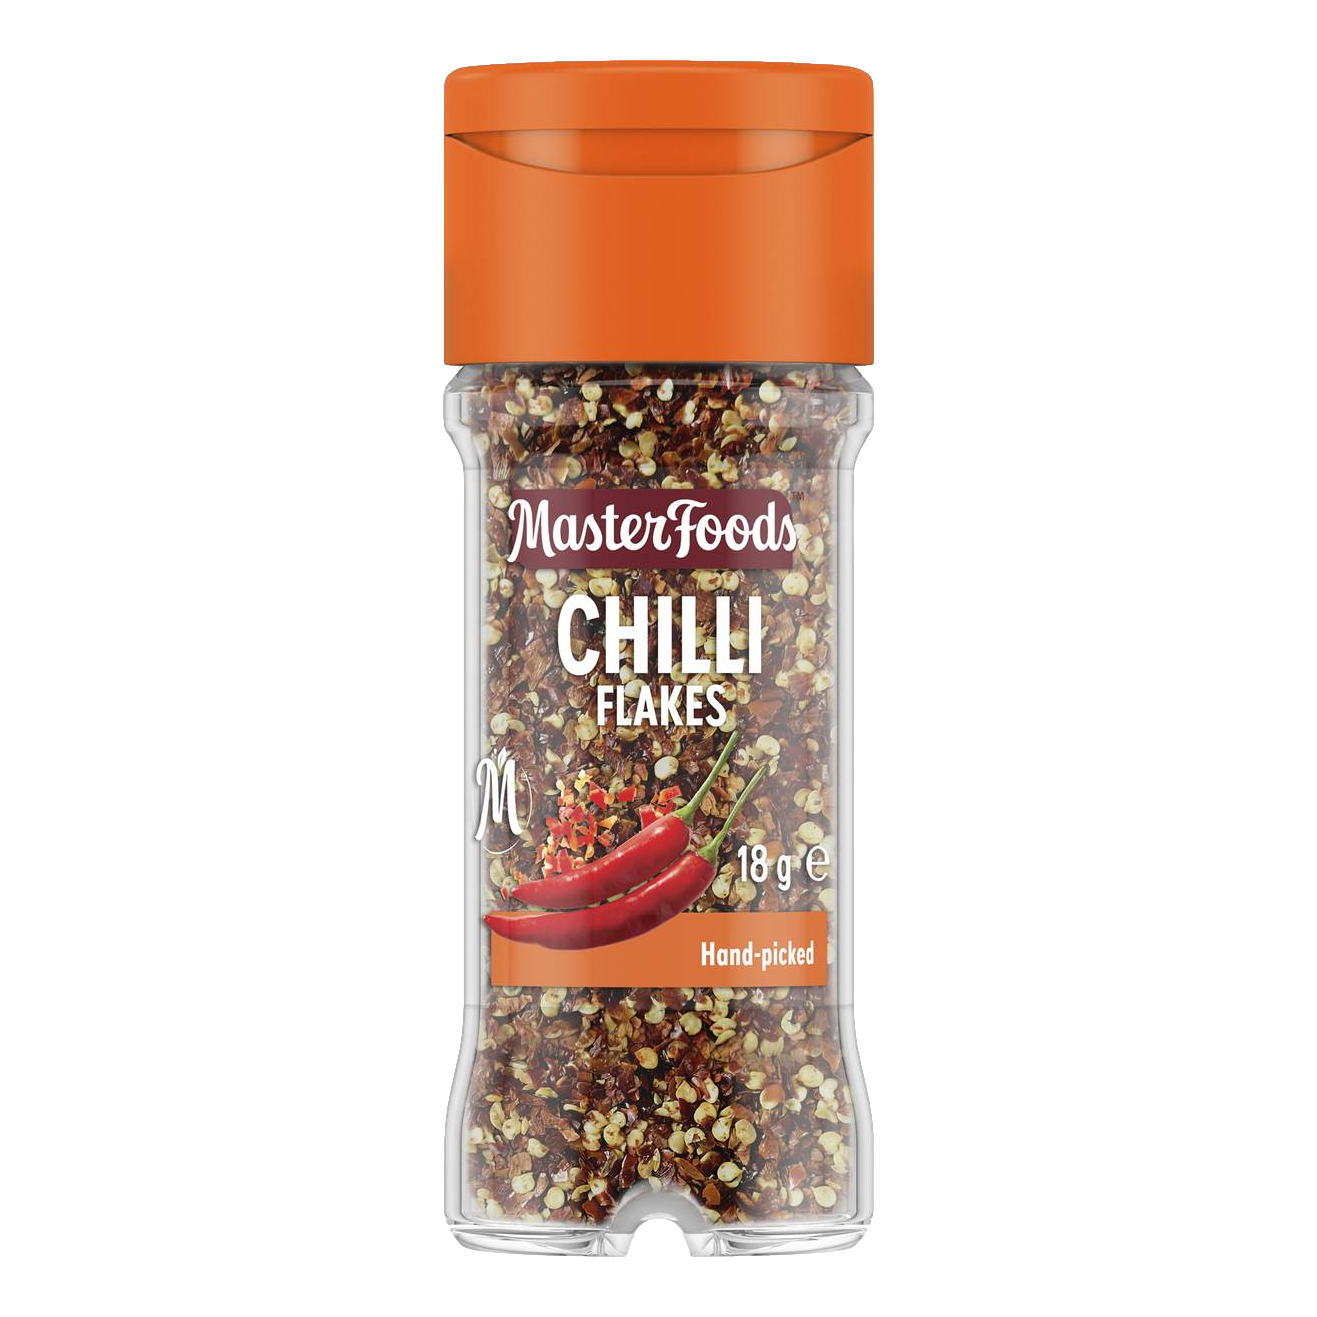 Masterfoods Chilli Flakes 18g